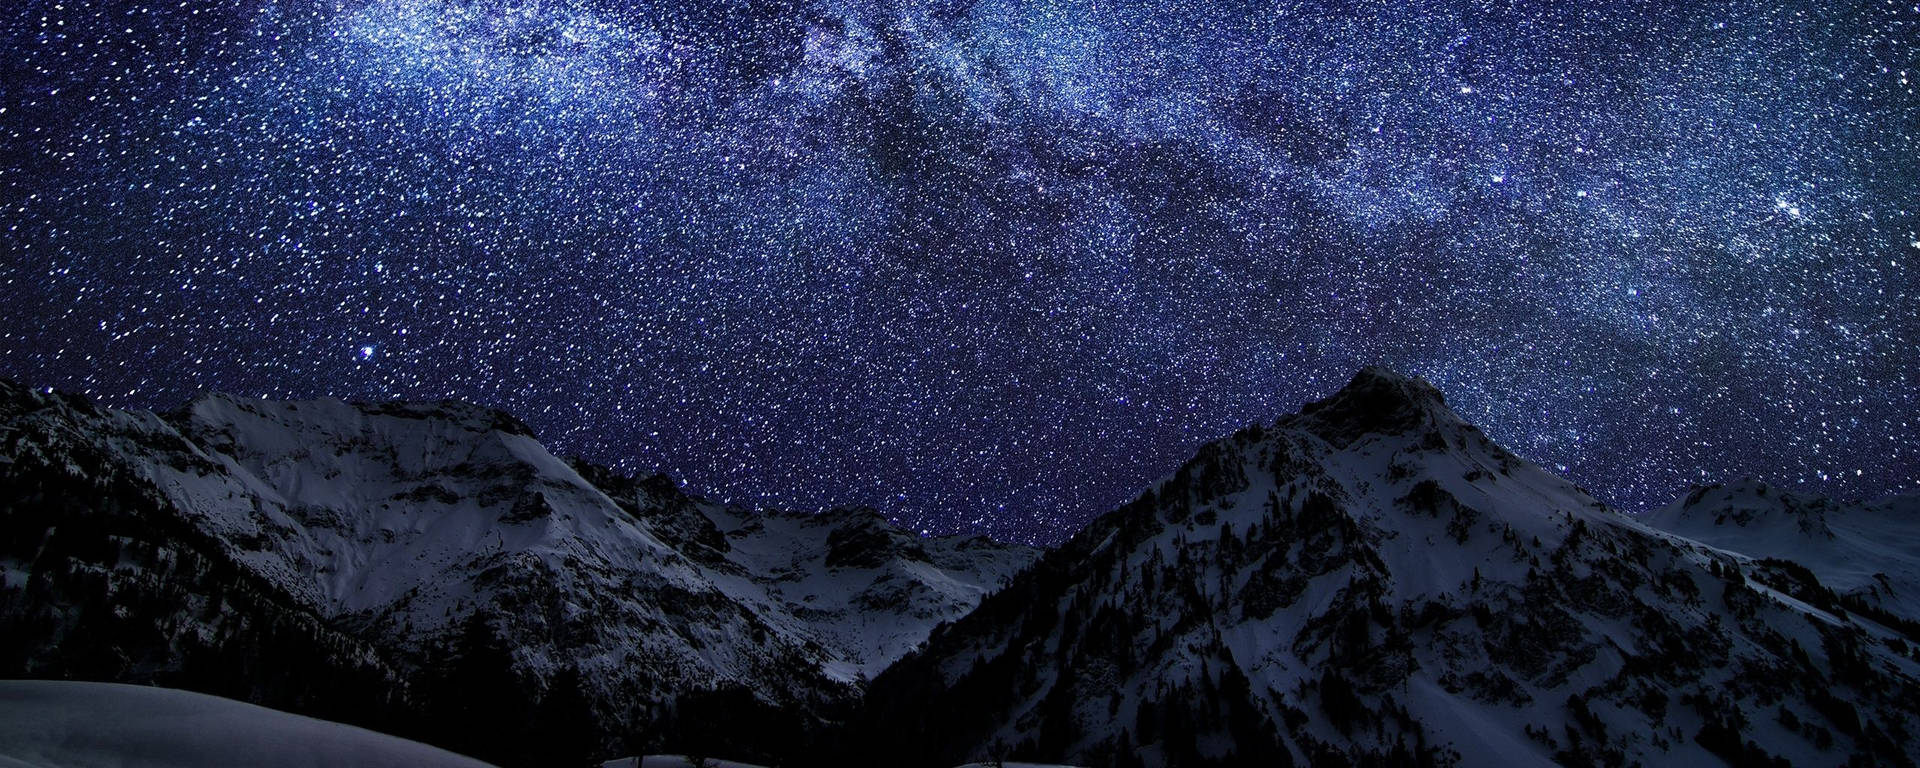 'a Vibrant Night In The Mountains' Background